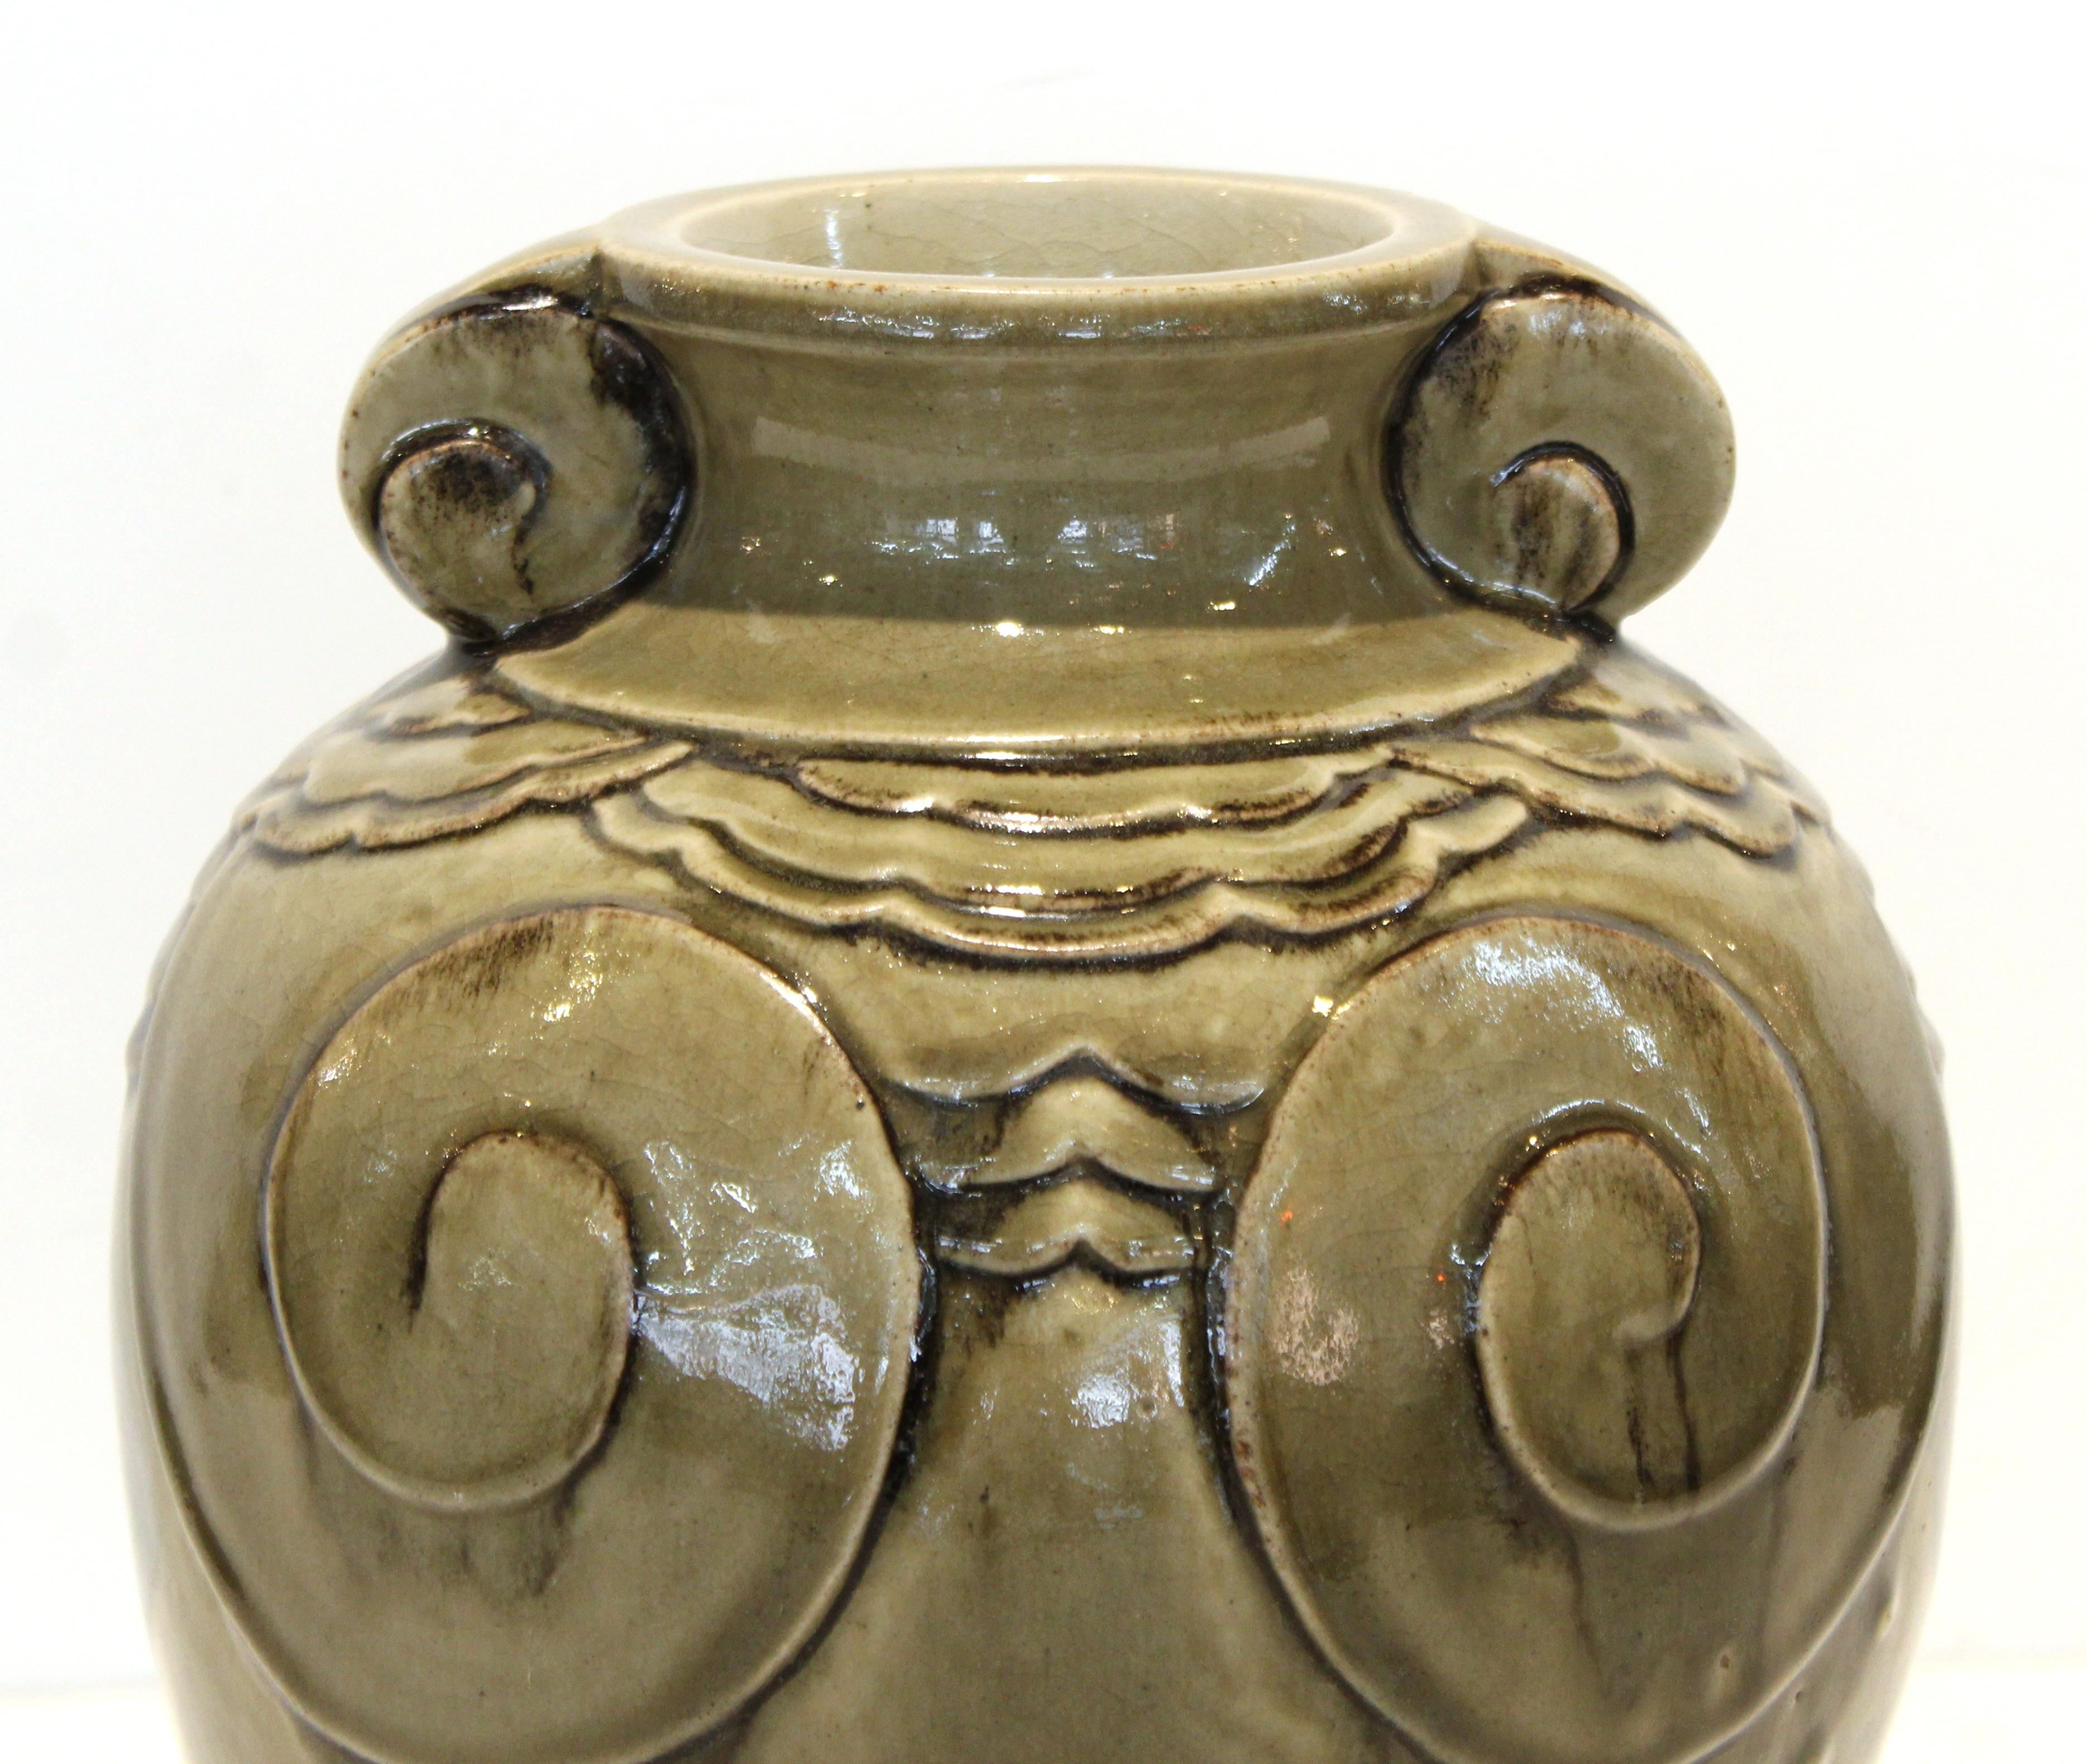 French Art Deco high-fired stoneware vase in celadon green attributed to Sevres. The piece has a decorative sculptural relief and was made in France in the mid-1920s. Mark 'E' on the bottom.
In great vintage condition with age-appropriate wear and